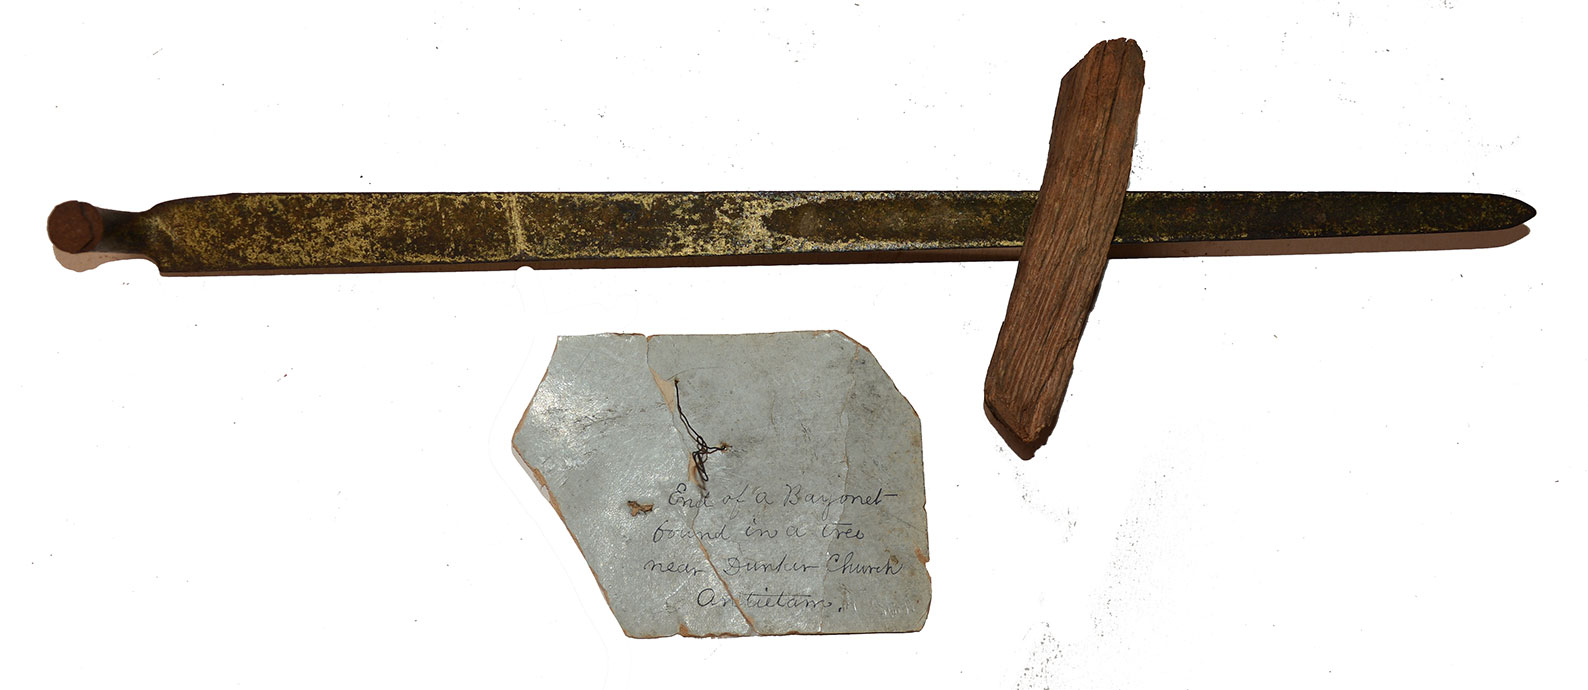 RELIC BAYONET IN WOOD FOUND NEAR THE DUNKER CHURCH AT ANTIETAM - WITH LABEL FROM A CONNECTICUT GAR POST